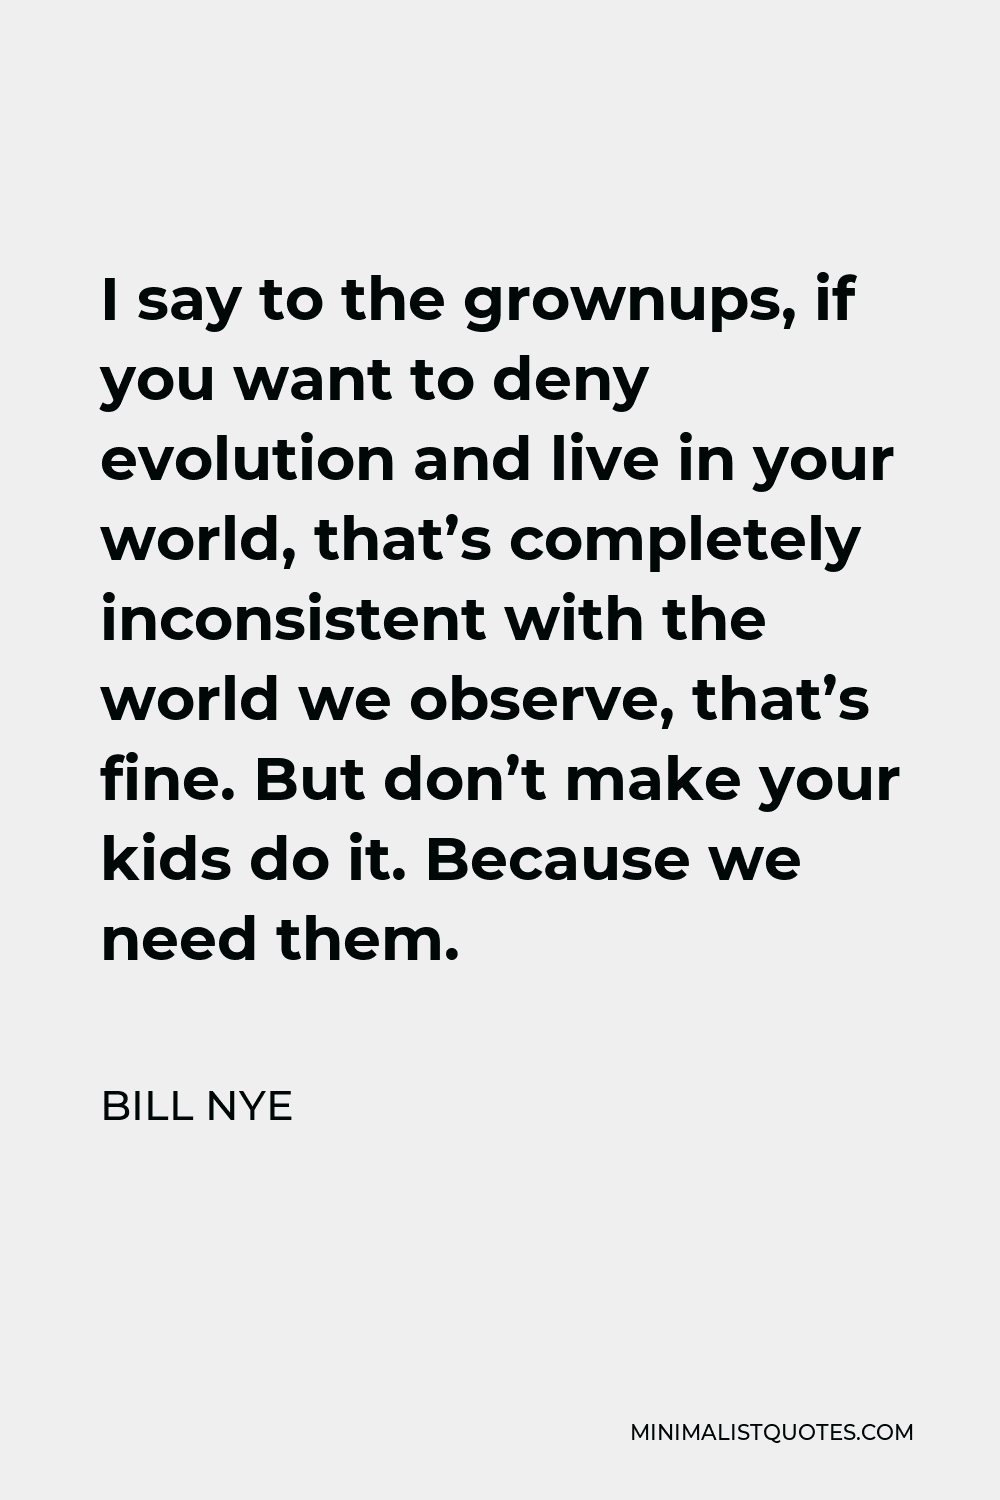 Bill Nye Quote - I say to the grownups, if you want to deny evolution and live in your world, that’s completely inconsistent with the world we observe, that’s fine. But don’t make your kids do it. Because we need them.